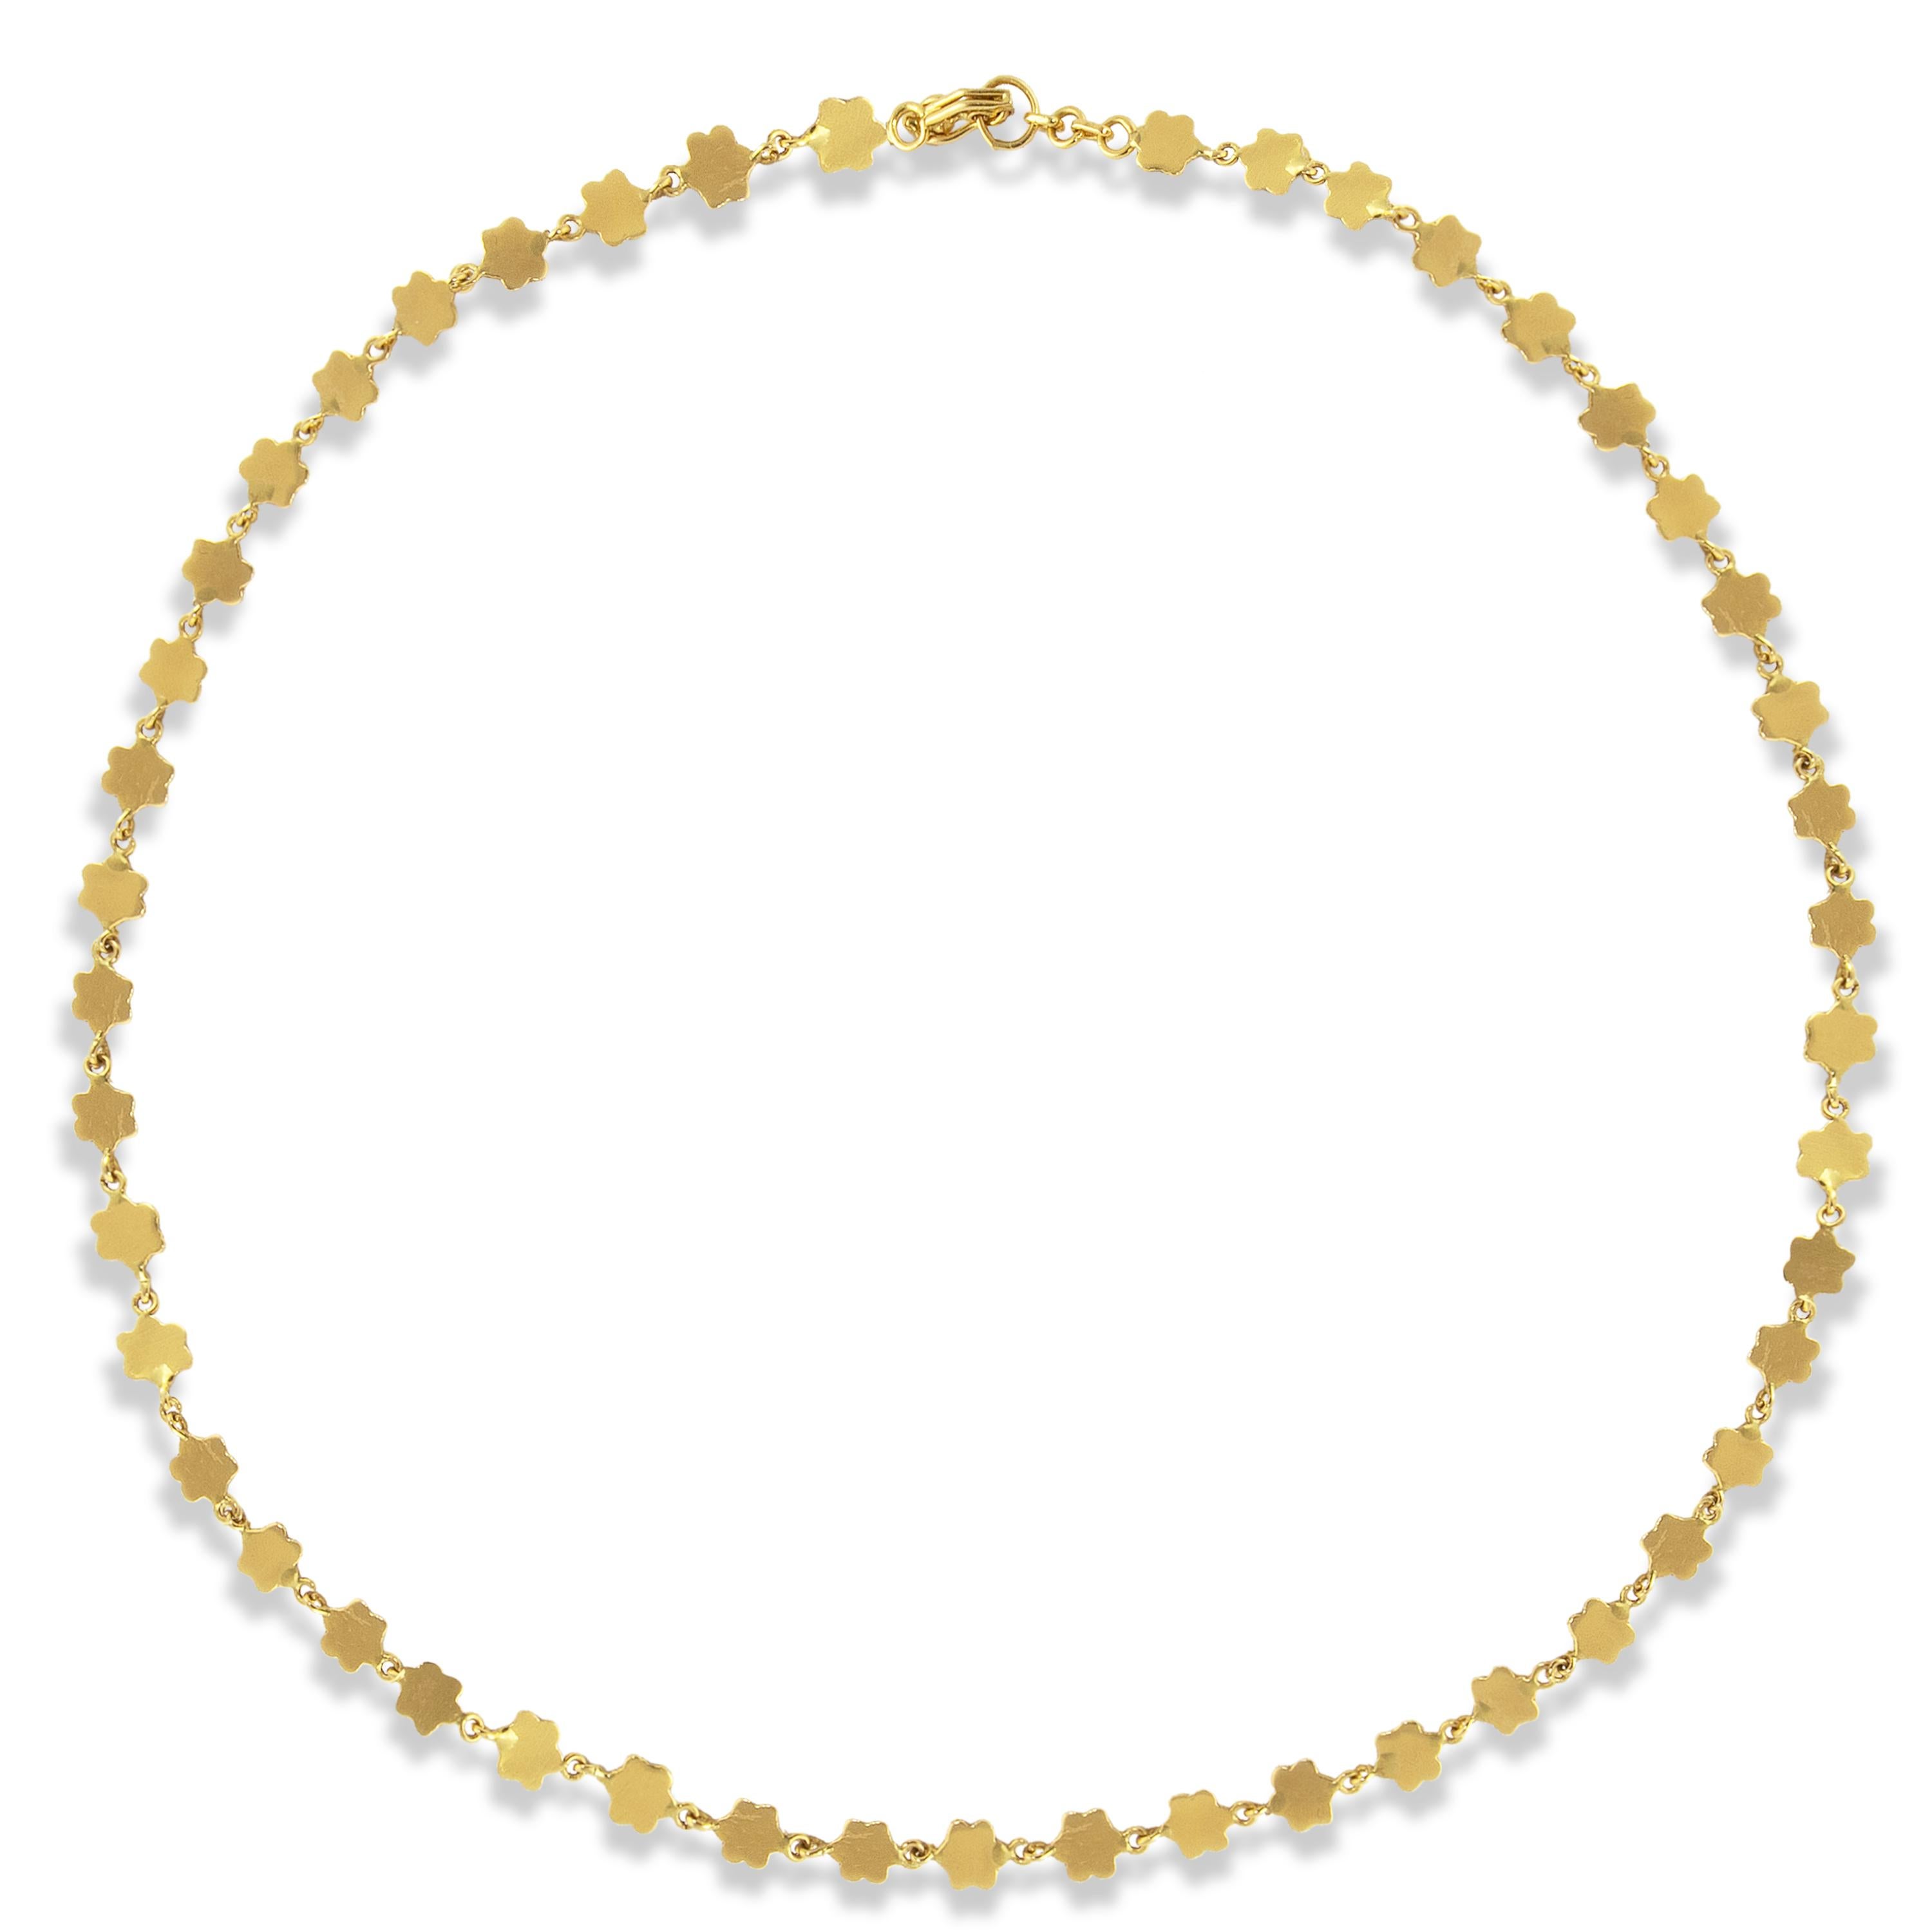 This 22k gold floral sequin necklace features fifty-one 6-petal flowers with a hook closure.  Each flower measures 6mm and the necklace is finished with a high polish.  A perfect everyday piece to wear alone or layered with other